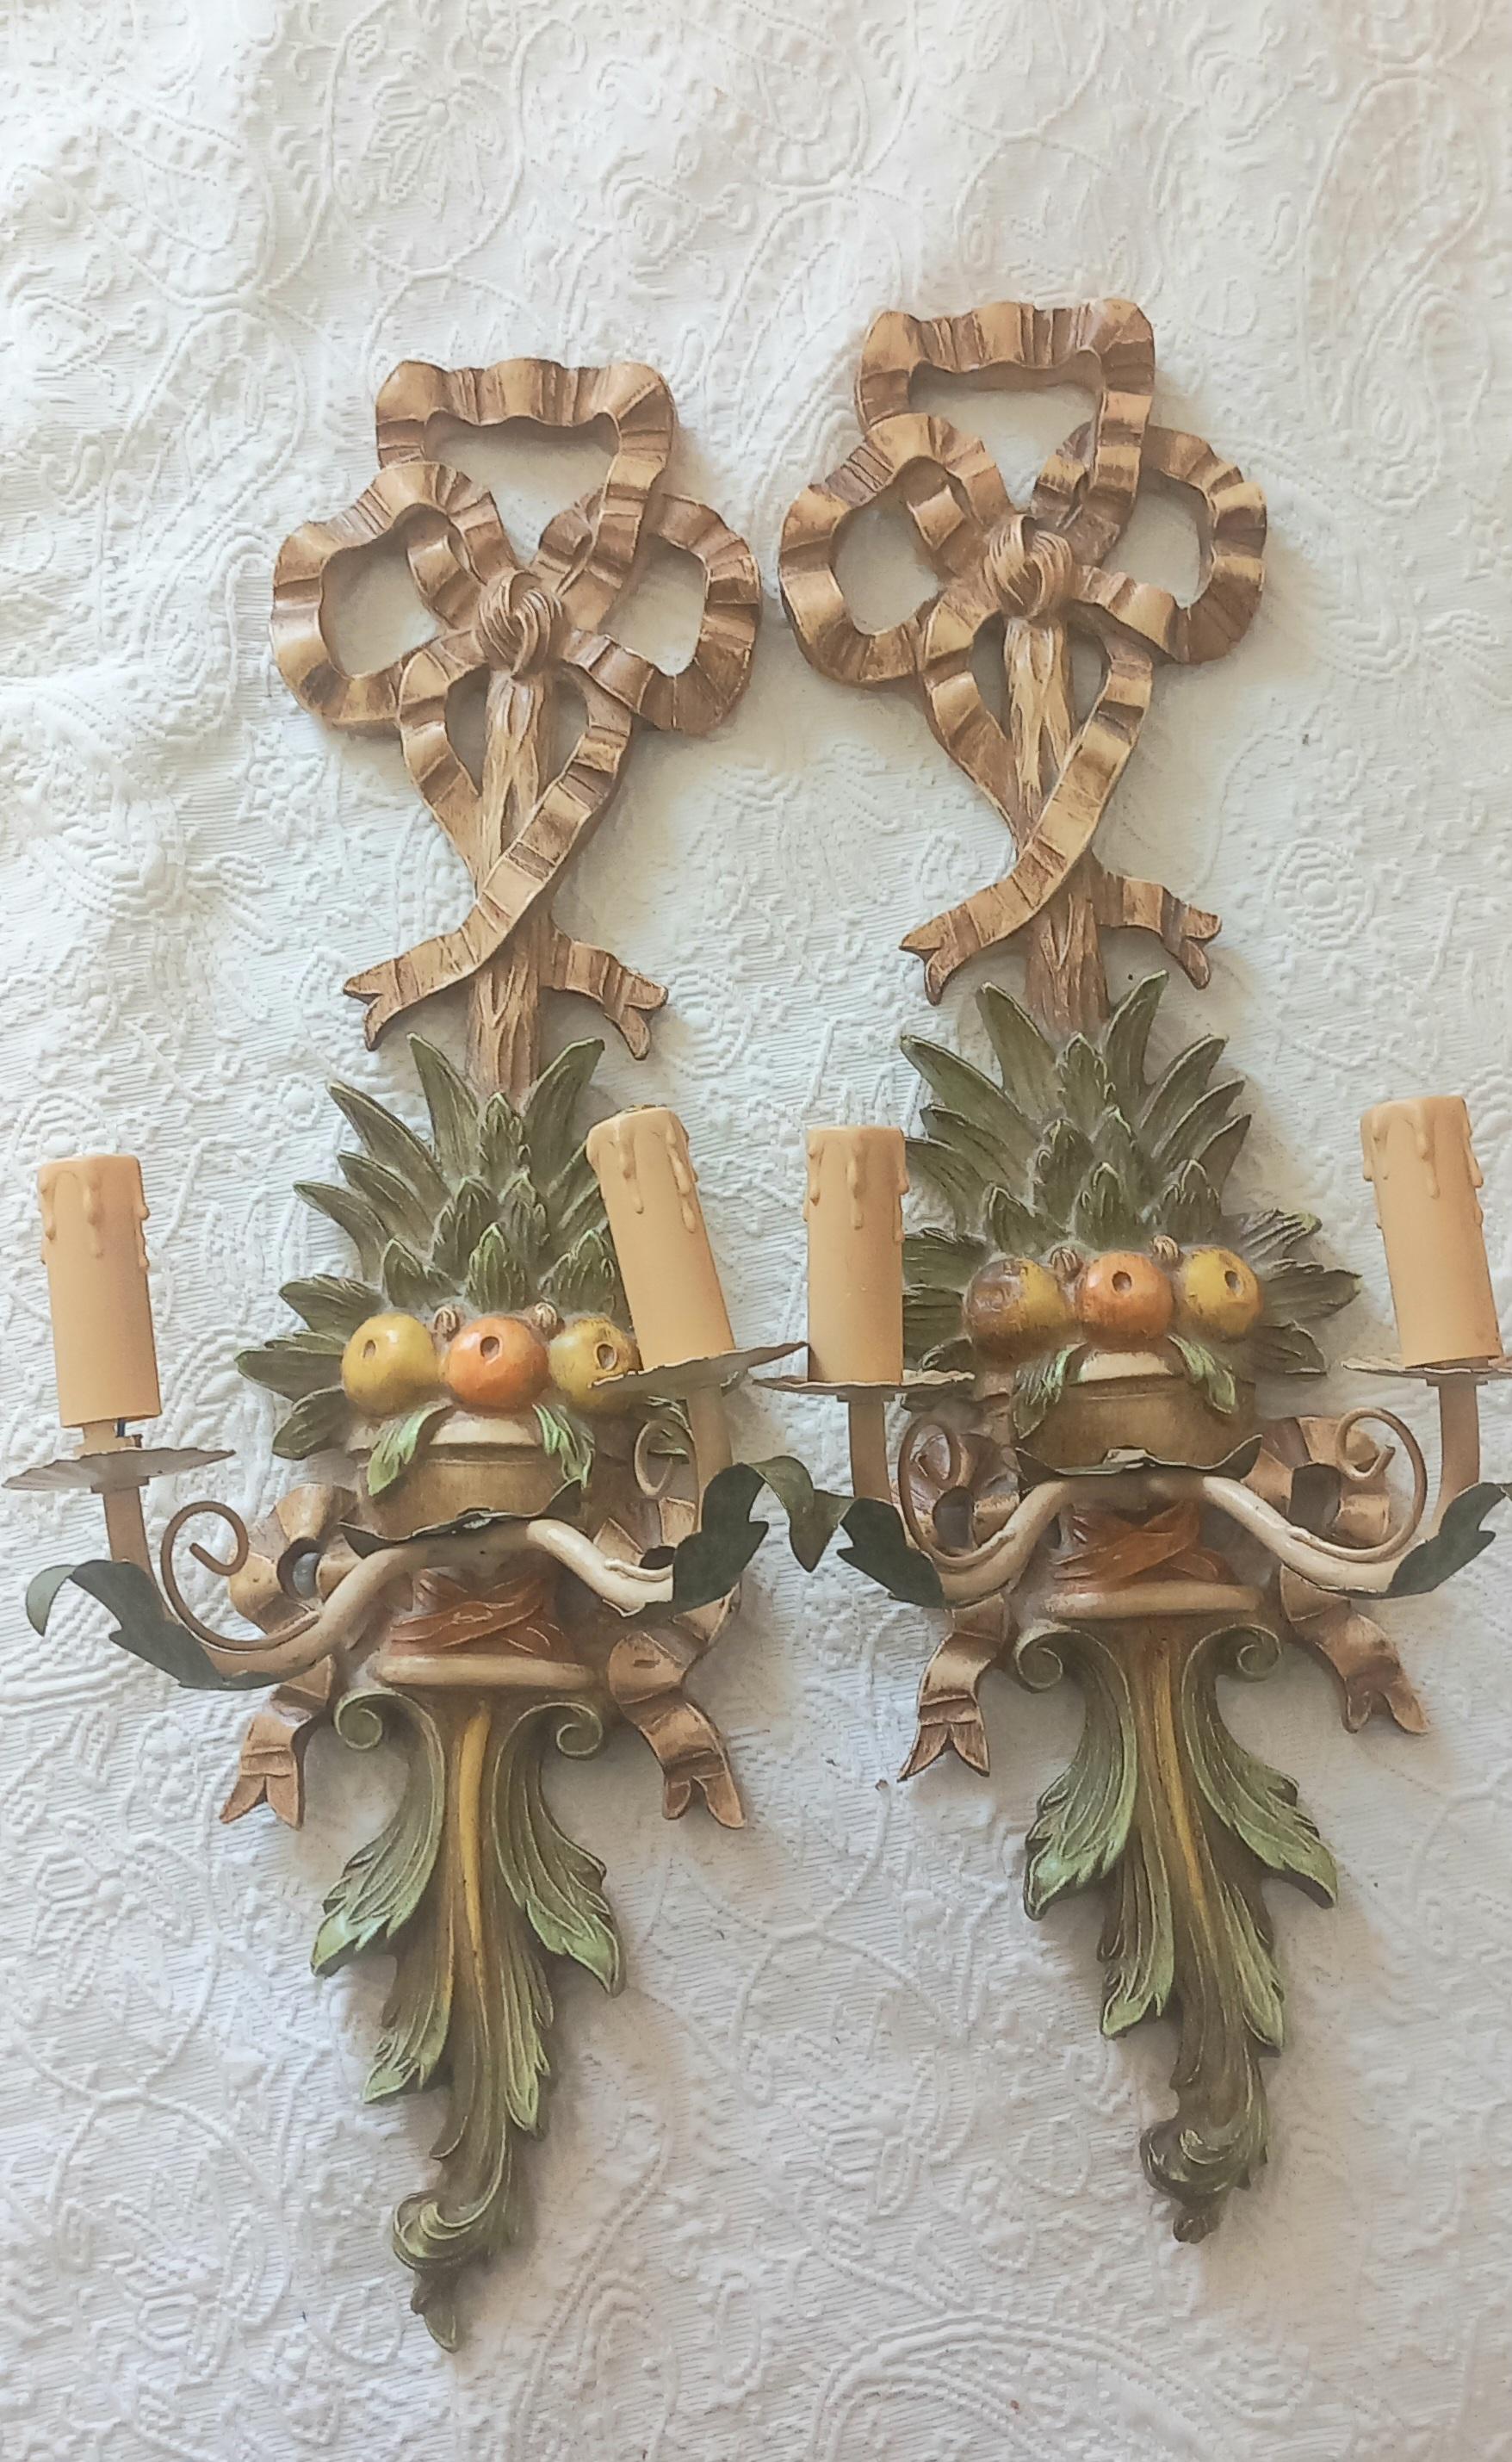 Beautiful light fixtures with fruits and polychrome top bow with warm tones
  A mix between Louis XVI style and Tuscan style
  It has two metal sconces with two lights finished in candle.
  They are made of wood and some parts seem to be made with